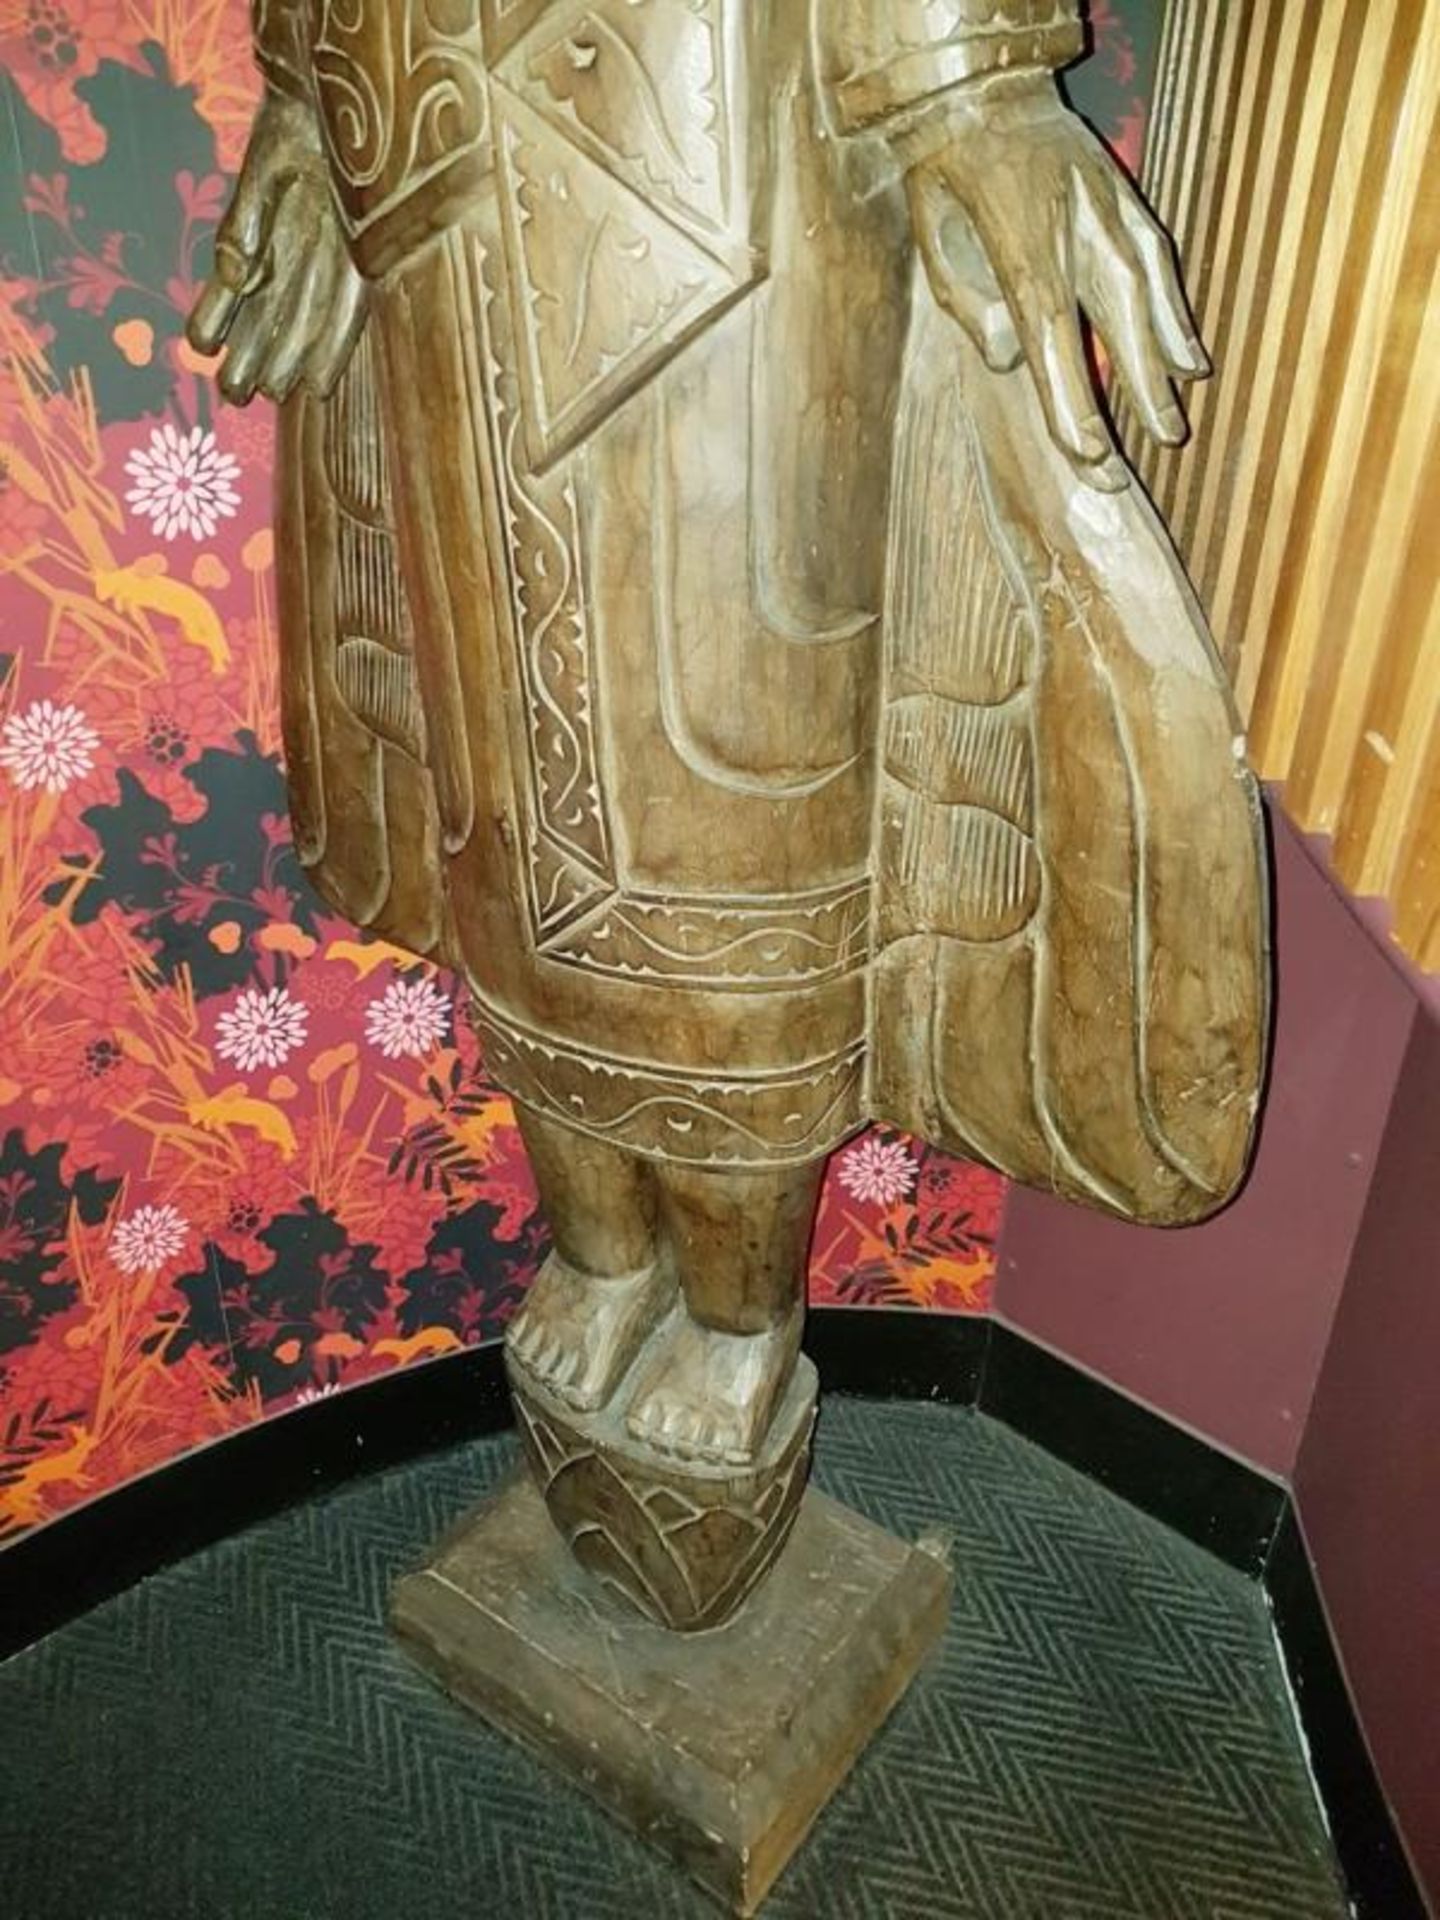 1 x Freestanding Buddha Statue - Over 8ft Tall - Natural Carved Wood Finish - H270 x W95 x D40 cms - - Image 3 of 8